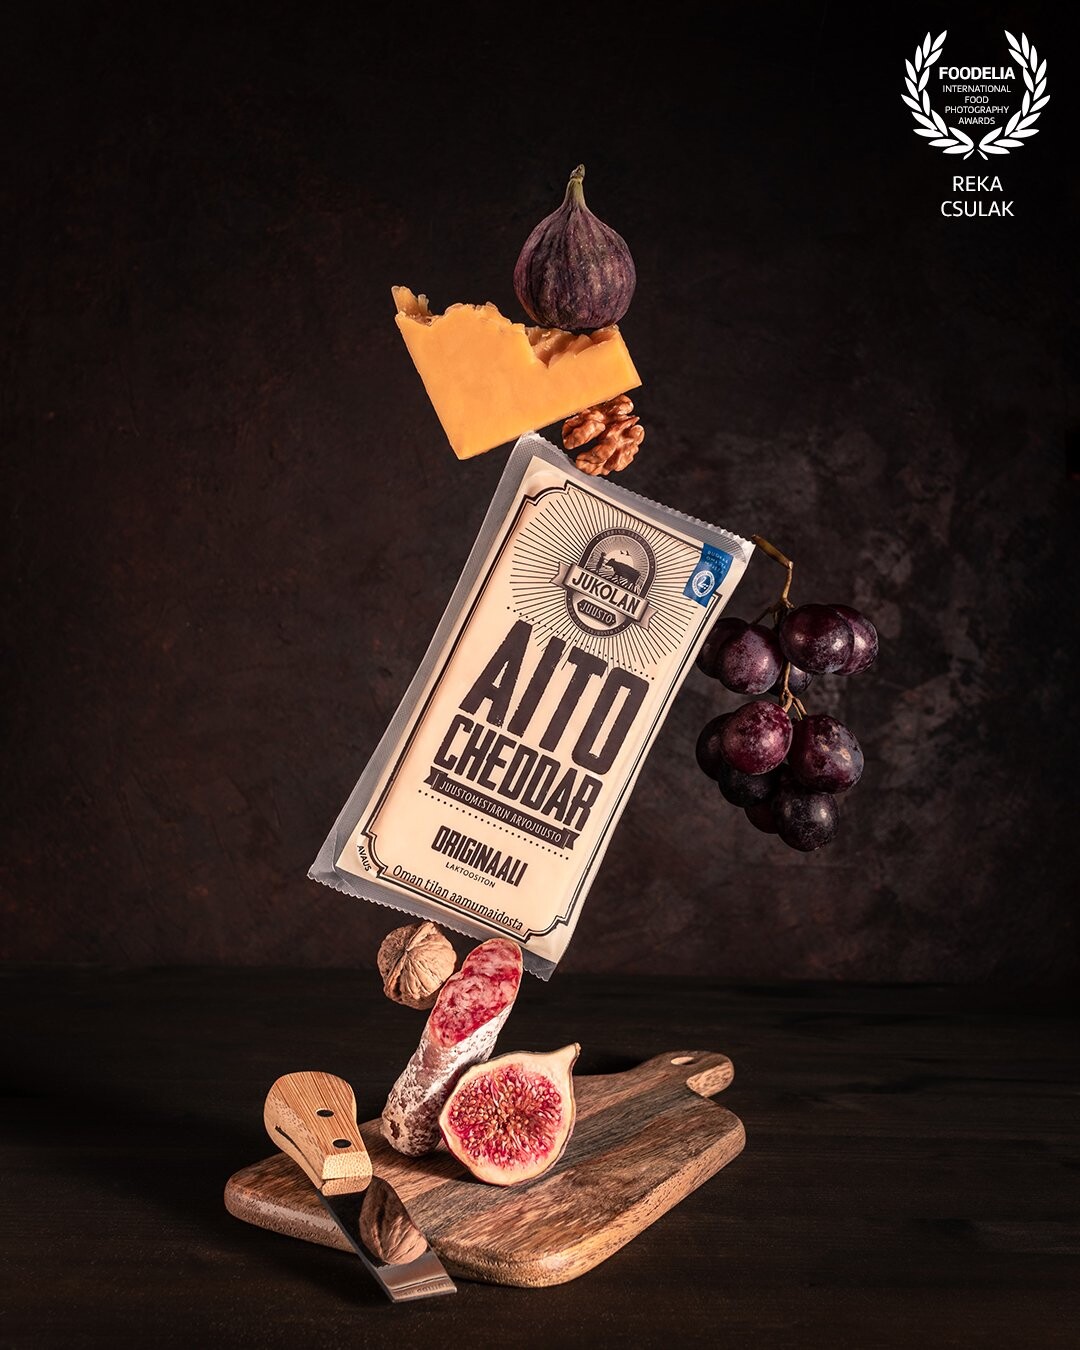 Cheddar and cheeseboard ingredients - grapes, salami, figs, nuts- are in balance, while the product is in the center of attention.